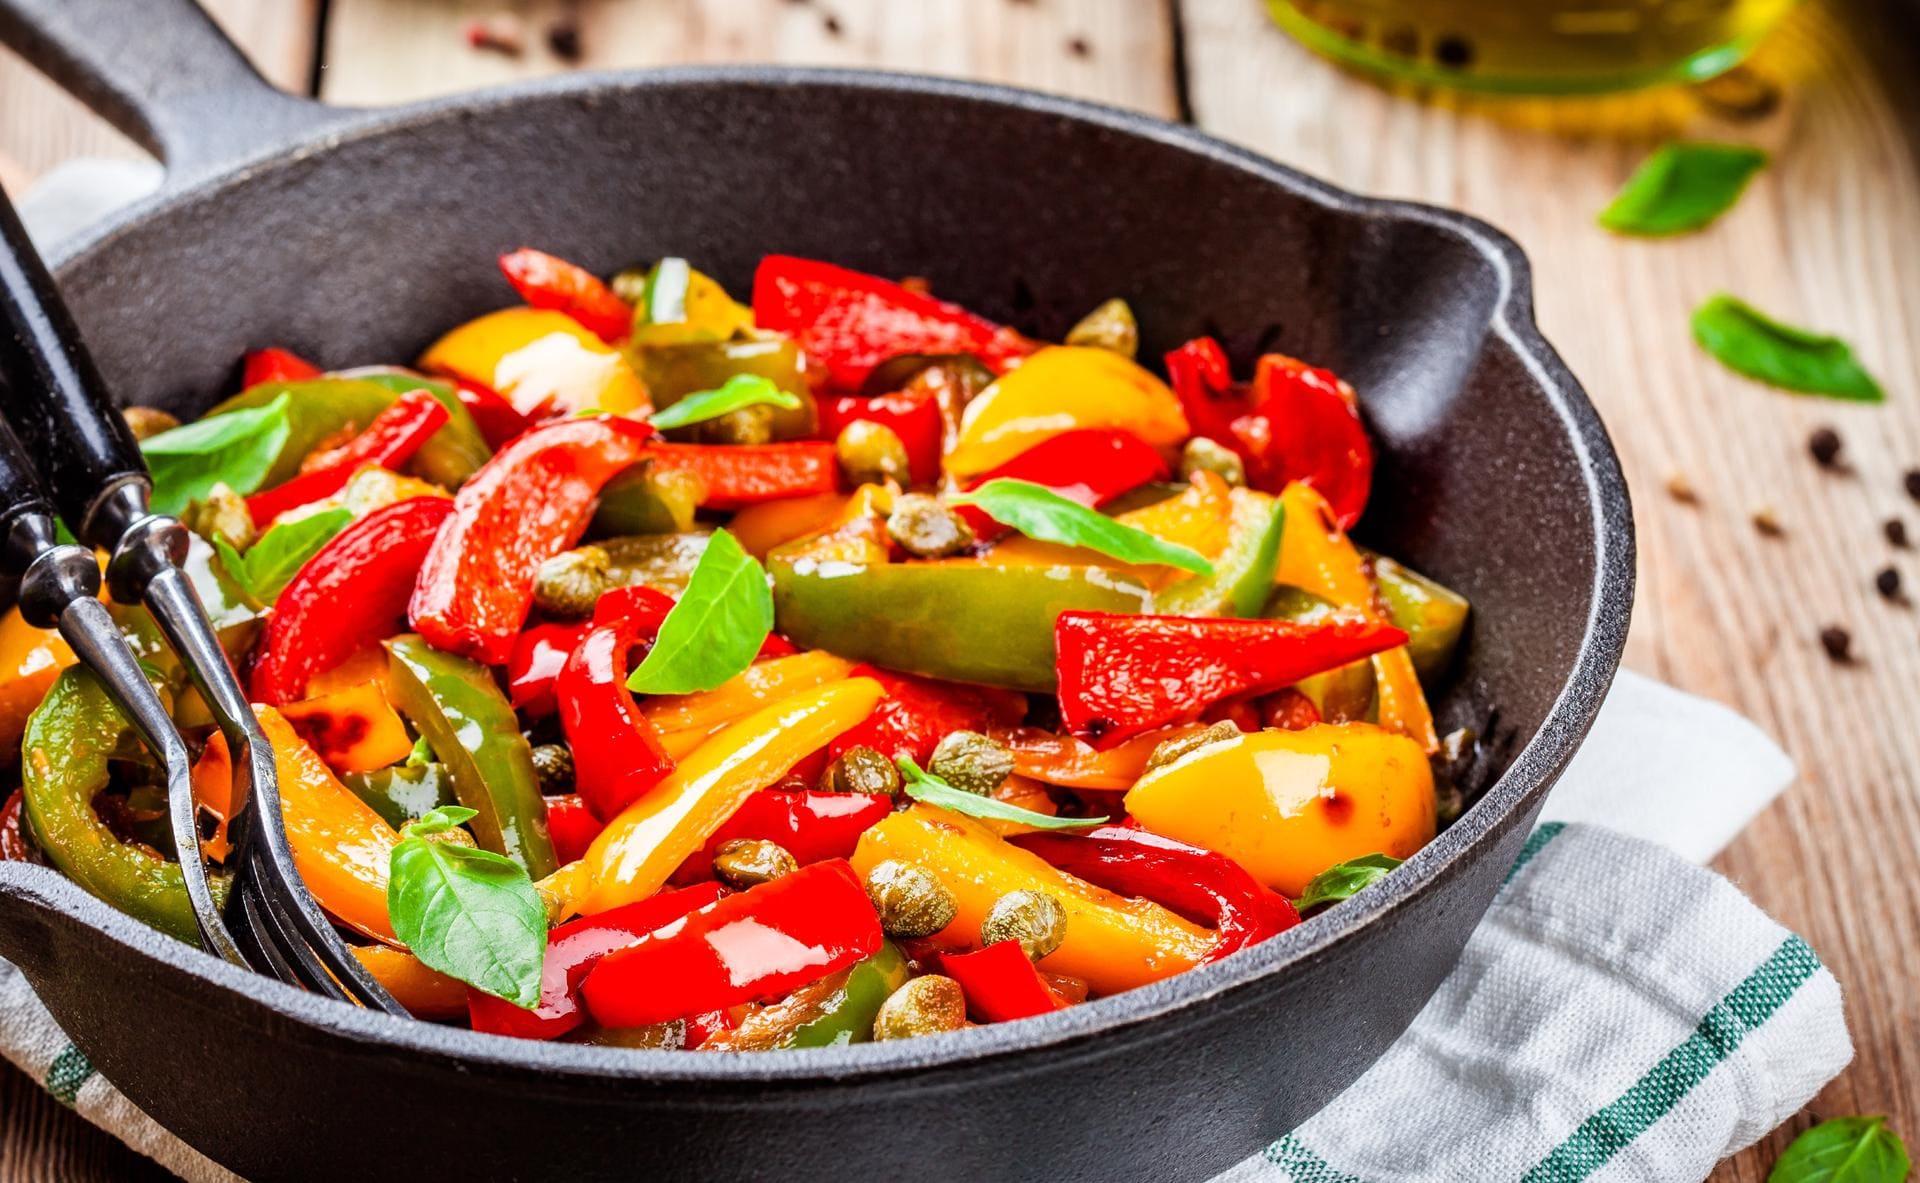 Piperade Stir Fry - A French Twist For Friday Night Dinner